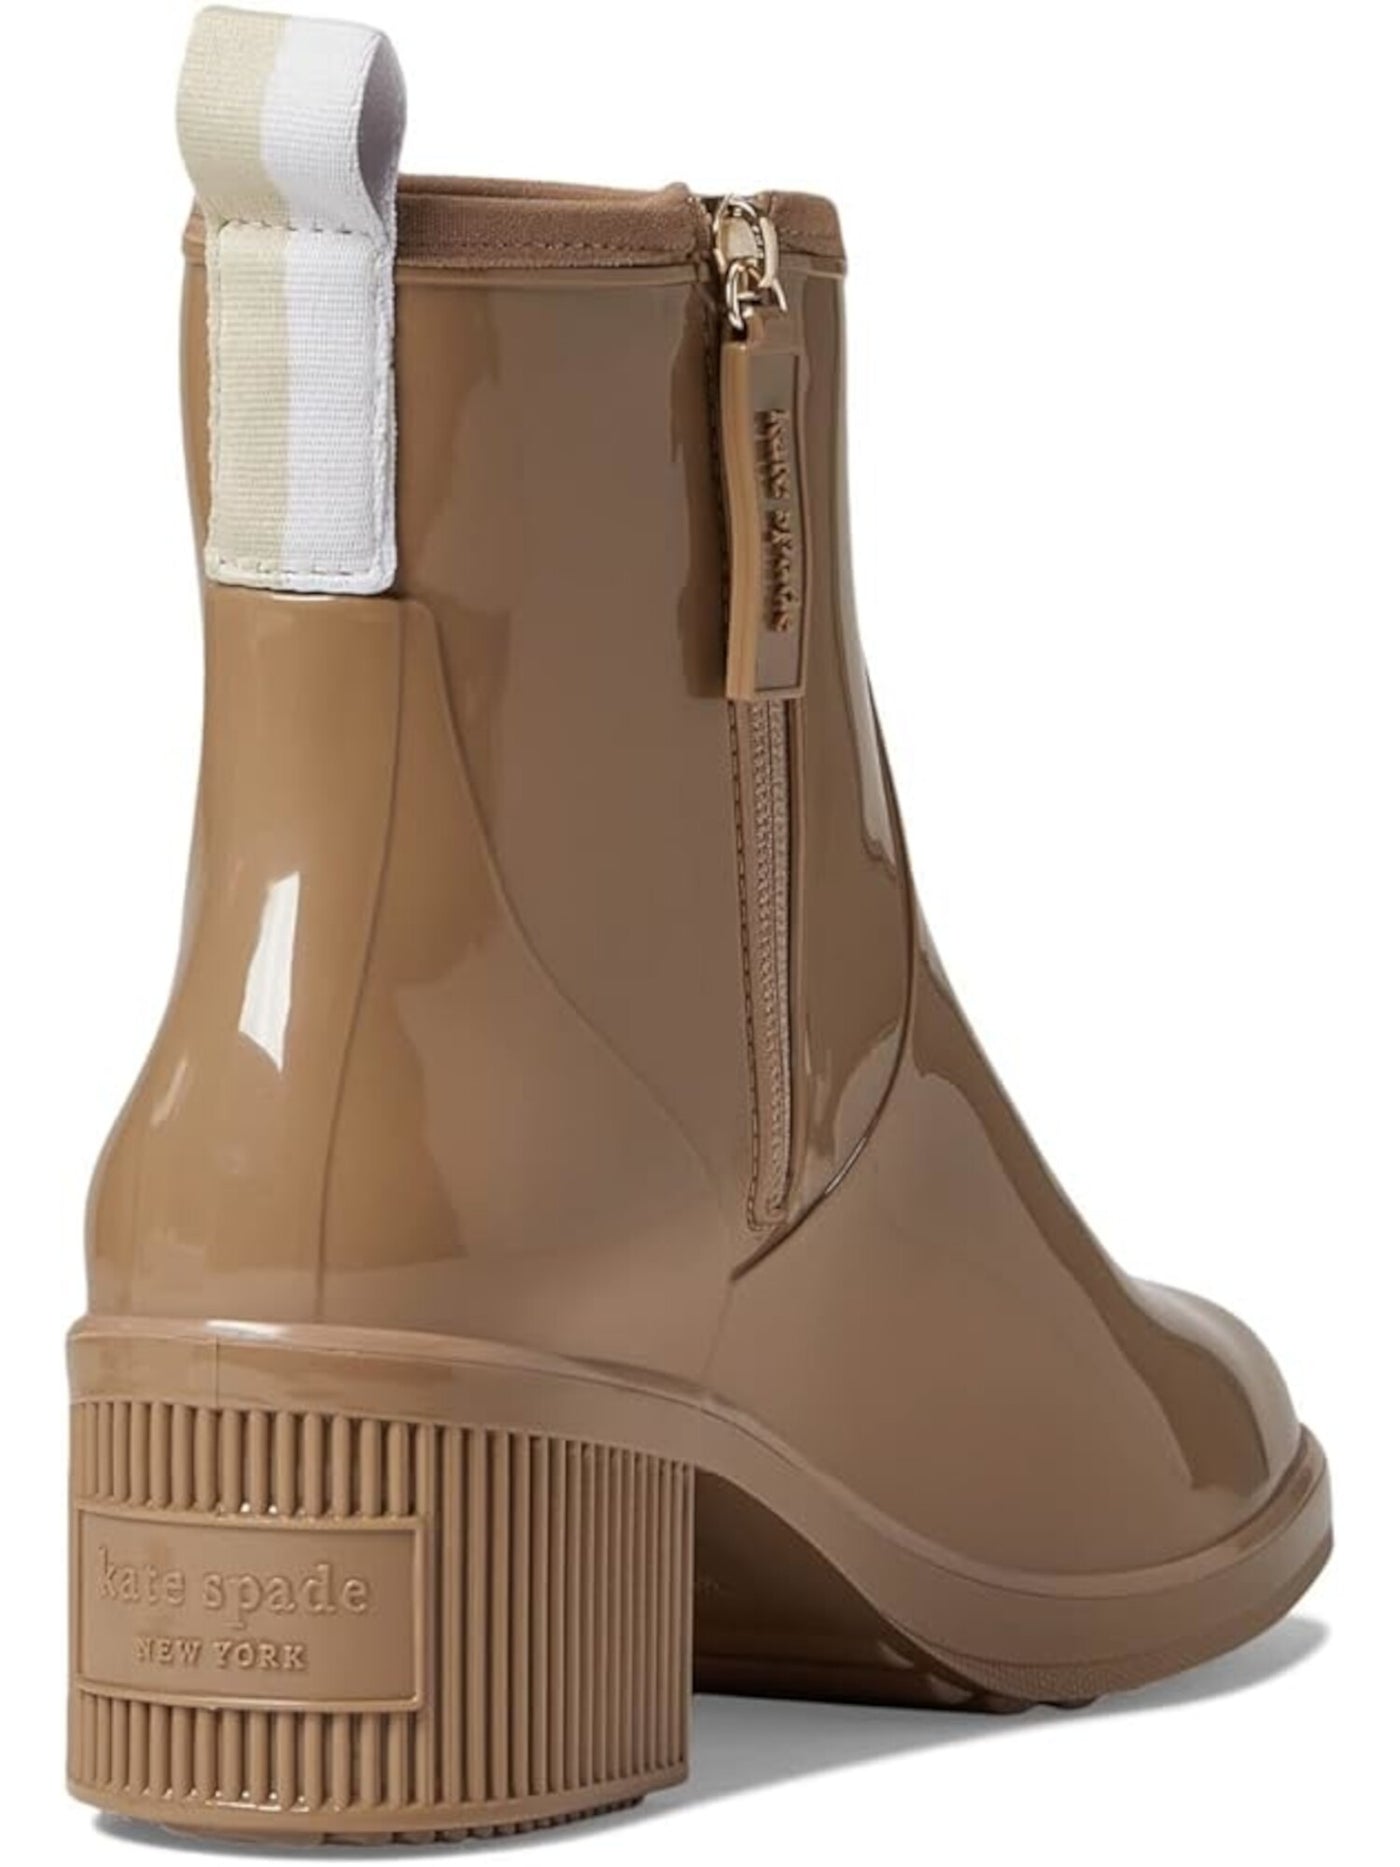 KATE SPADE NEW YORK Womens Beige Back Pull-Tab Padded Puddle Round Toe Block Heel Zip-Up Rain Boots 10